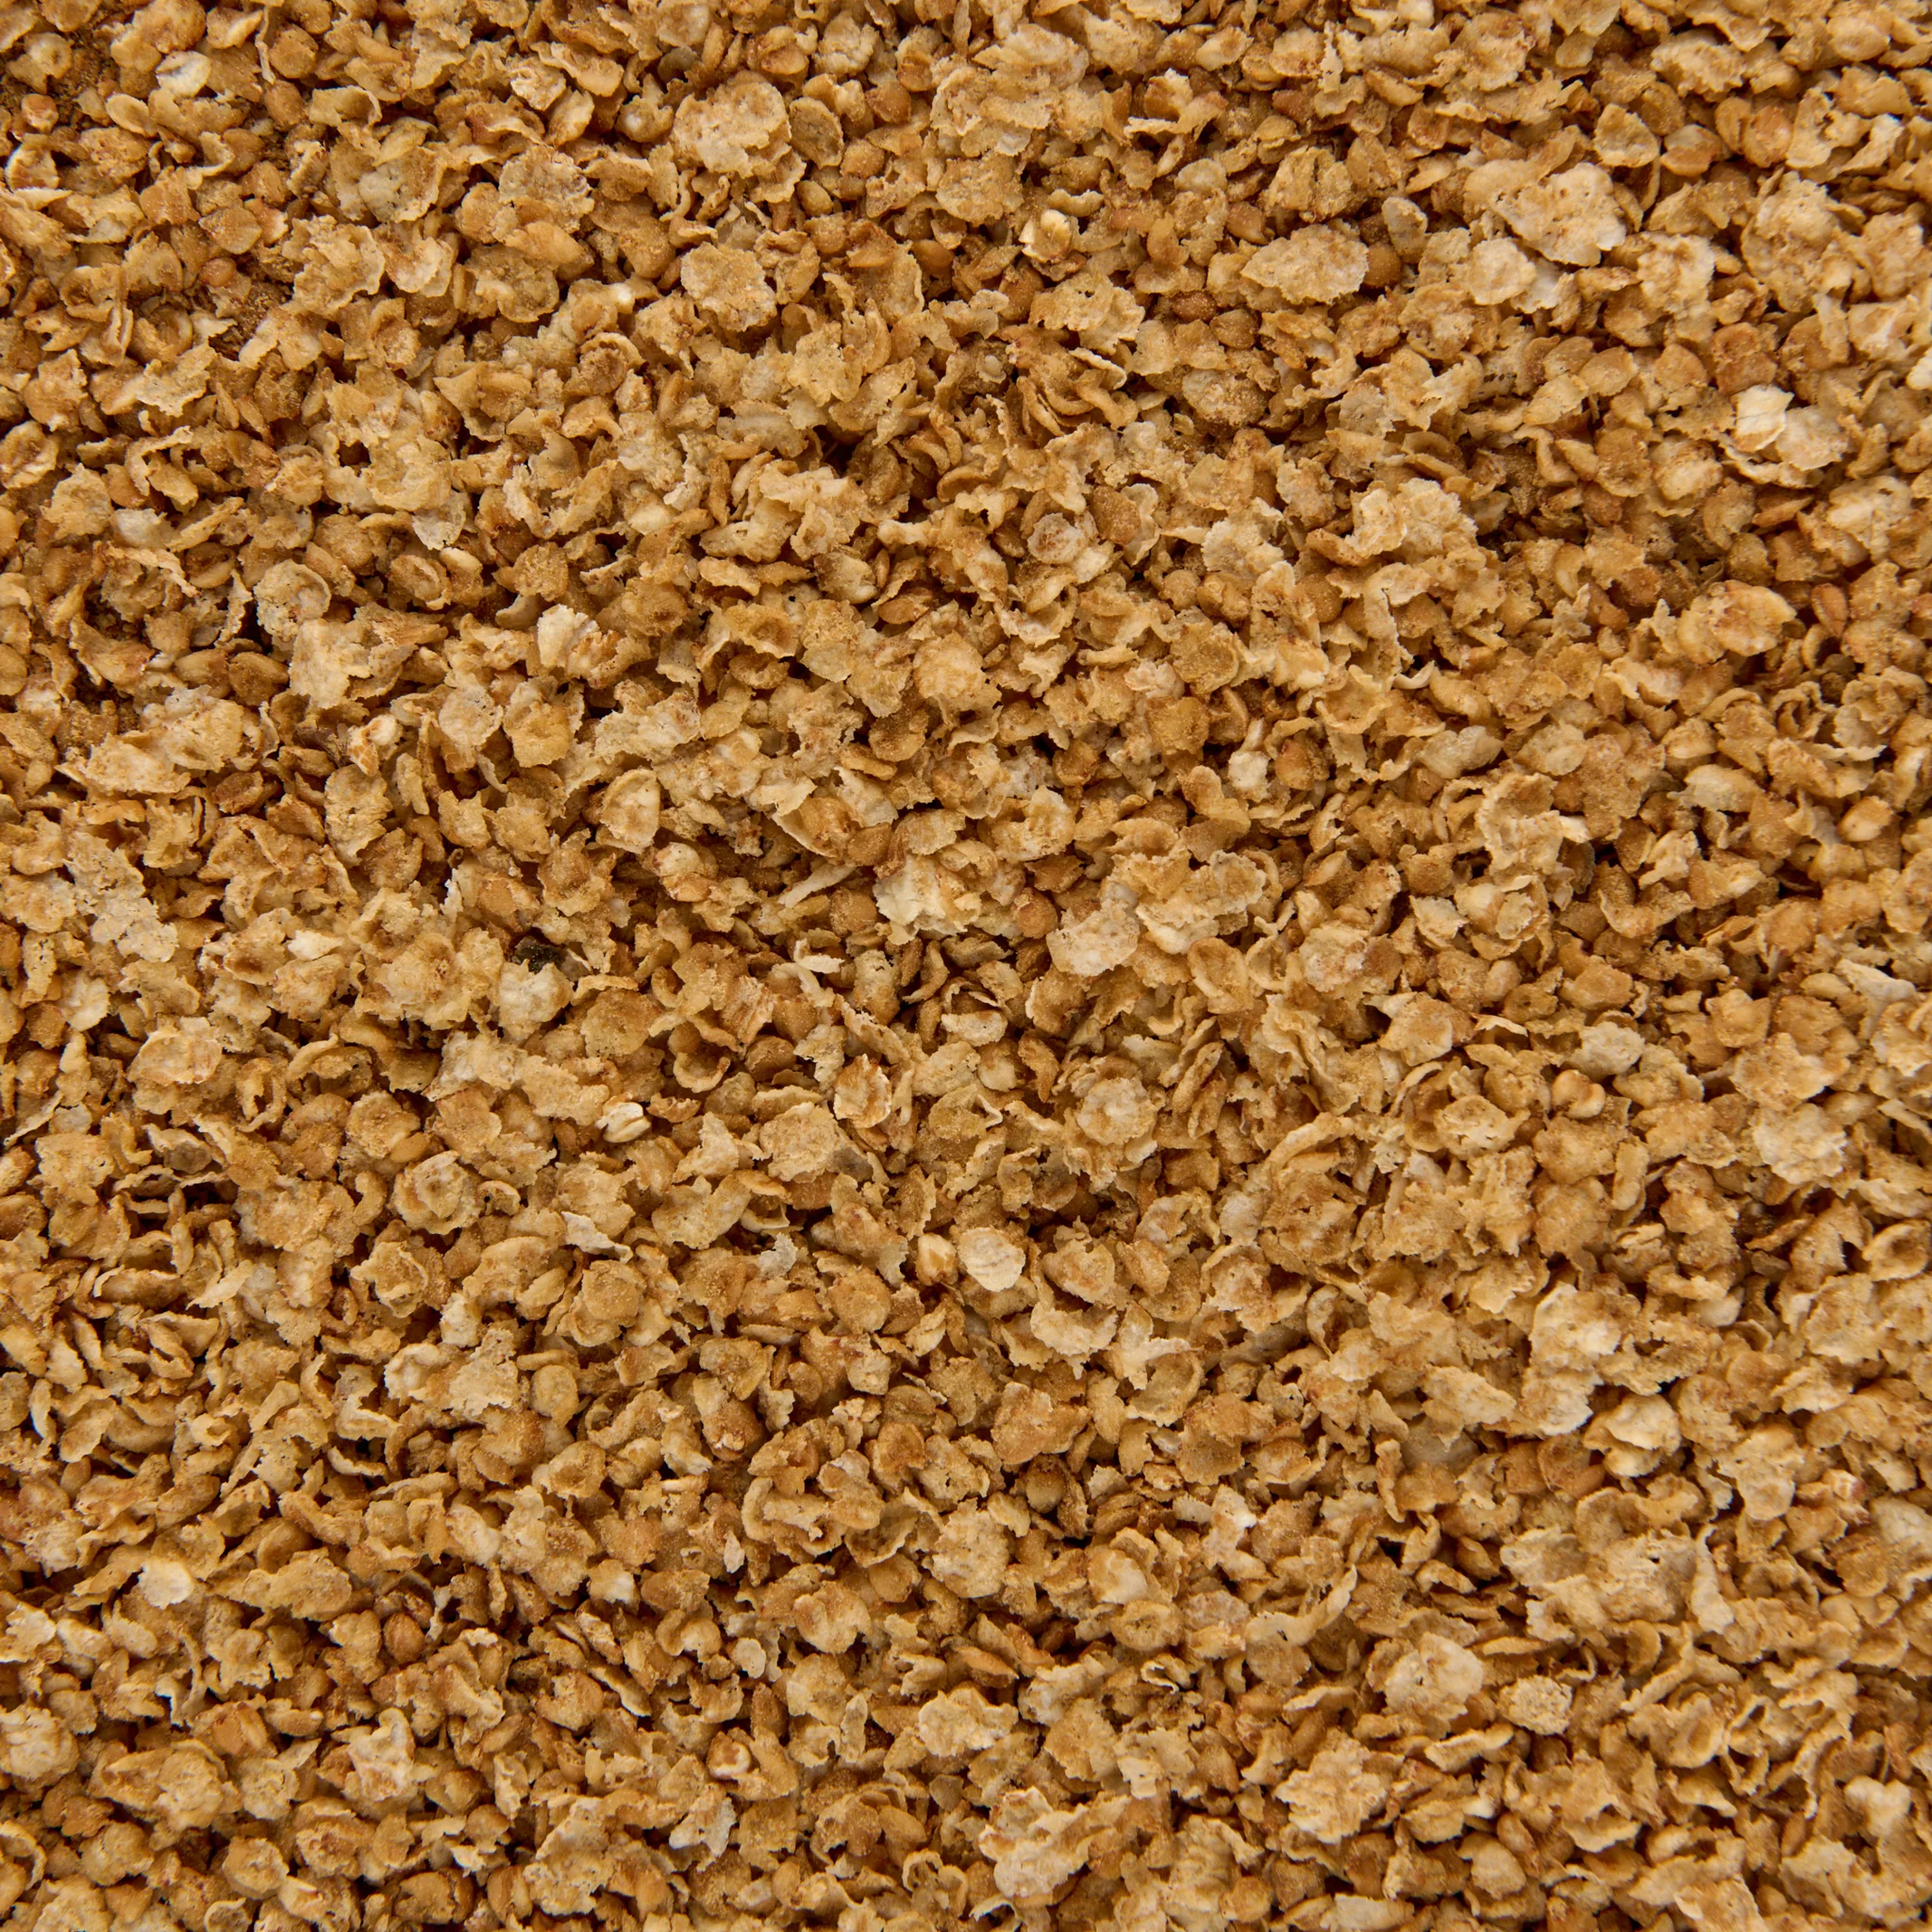 Buckwheat flakes that do not require cooking from the manufacturer